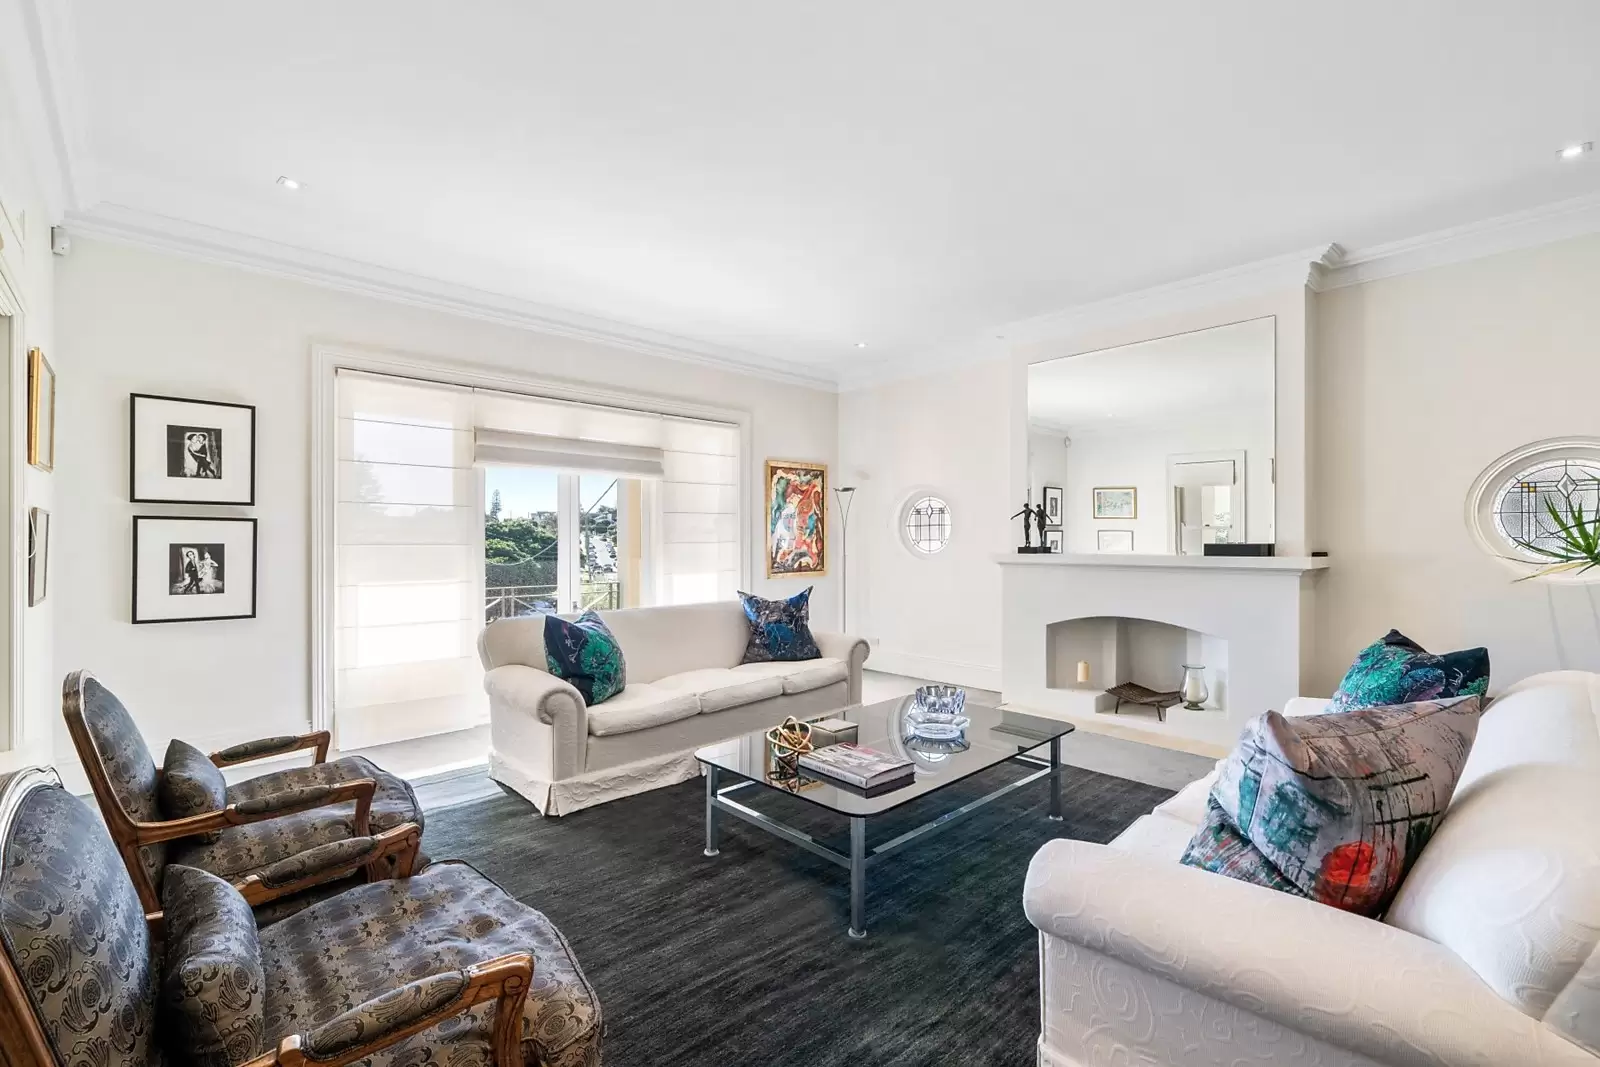 Photo #8: 33 Olphert Avenue, Vaucluse - Sold by Sydney Sotheby's International Realty